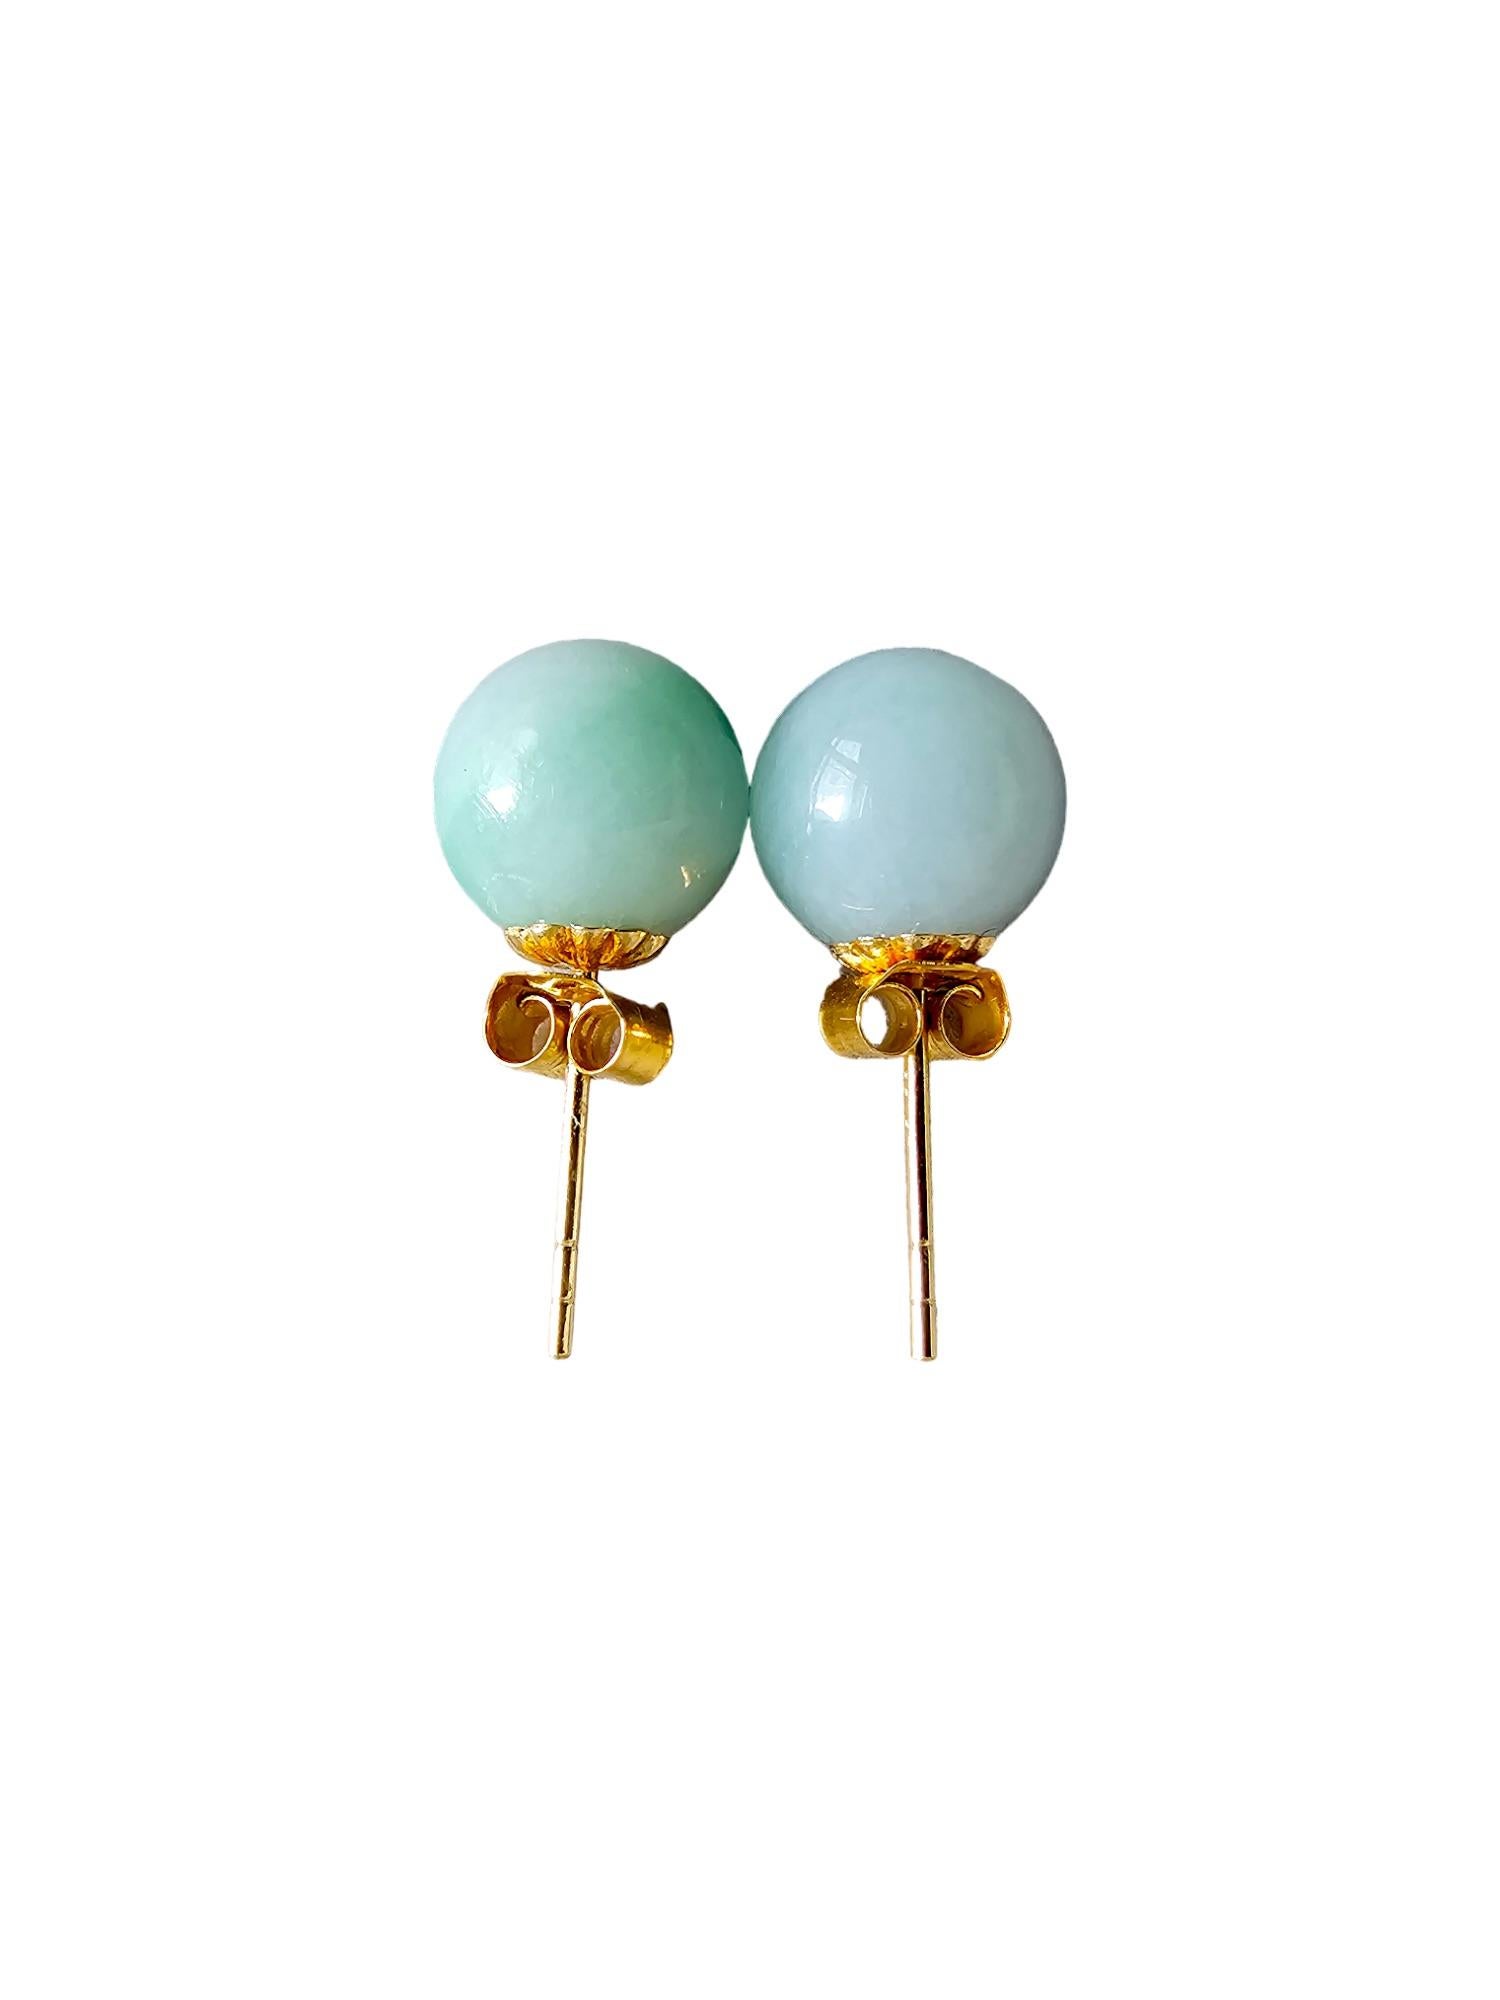 Beads of Eternity Burmese A-Jade Stud Earrings with 18K Yellow Gold 8mm 18001 For Sale 3